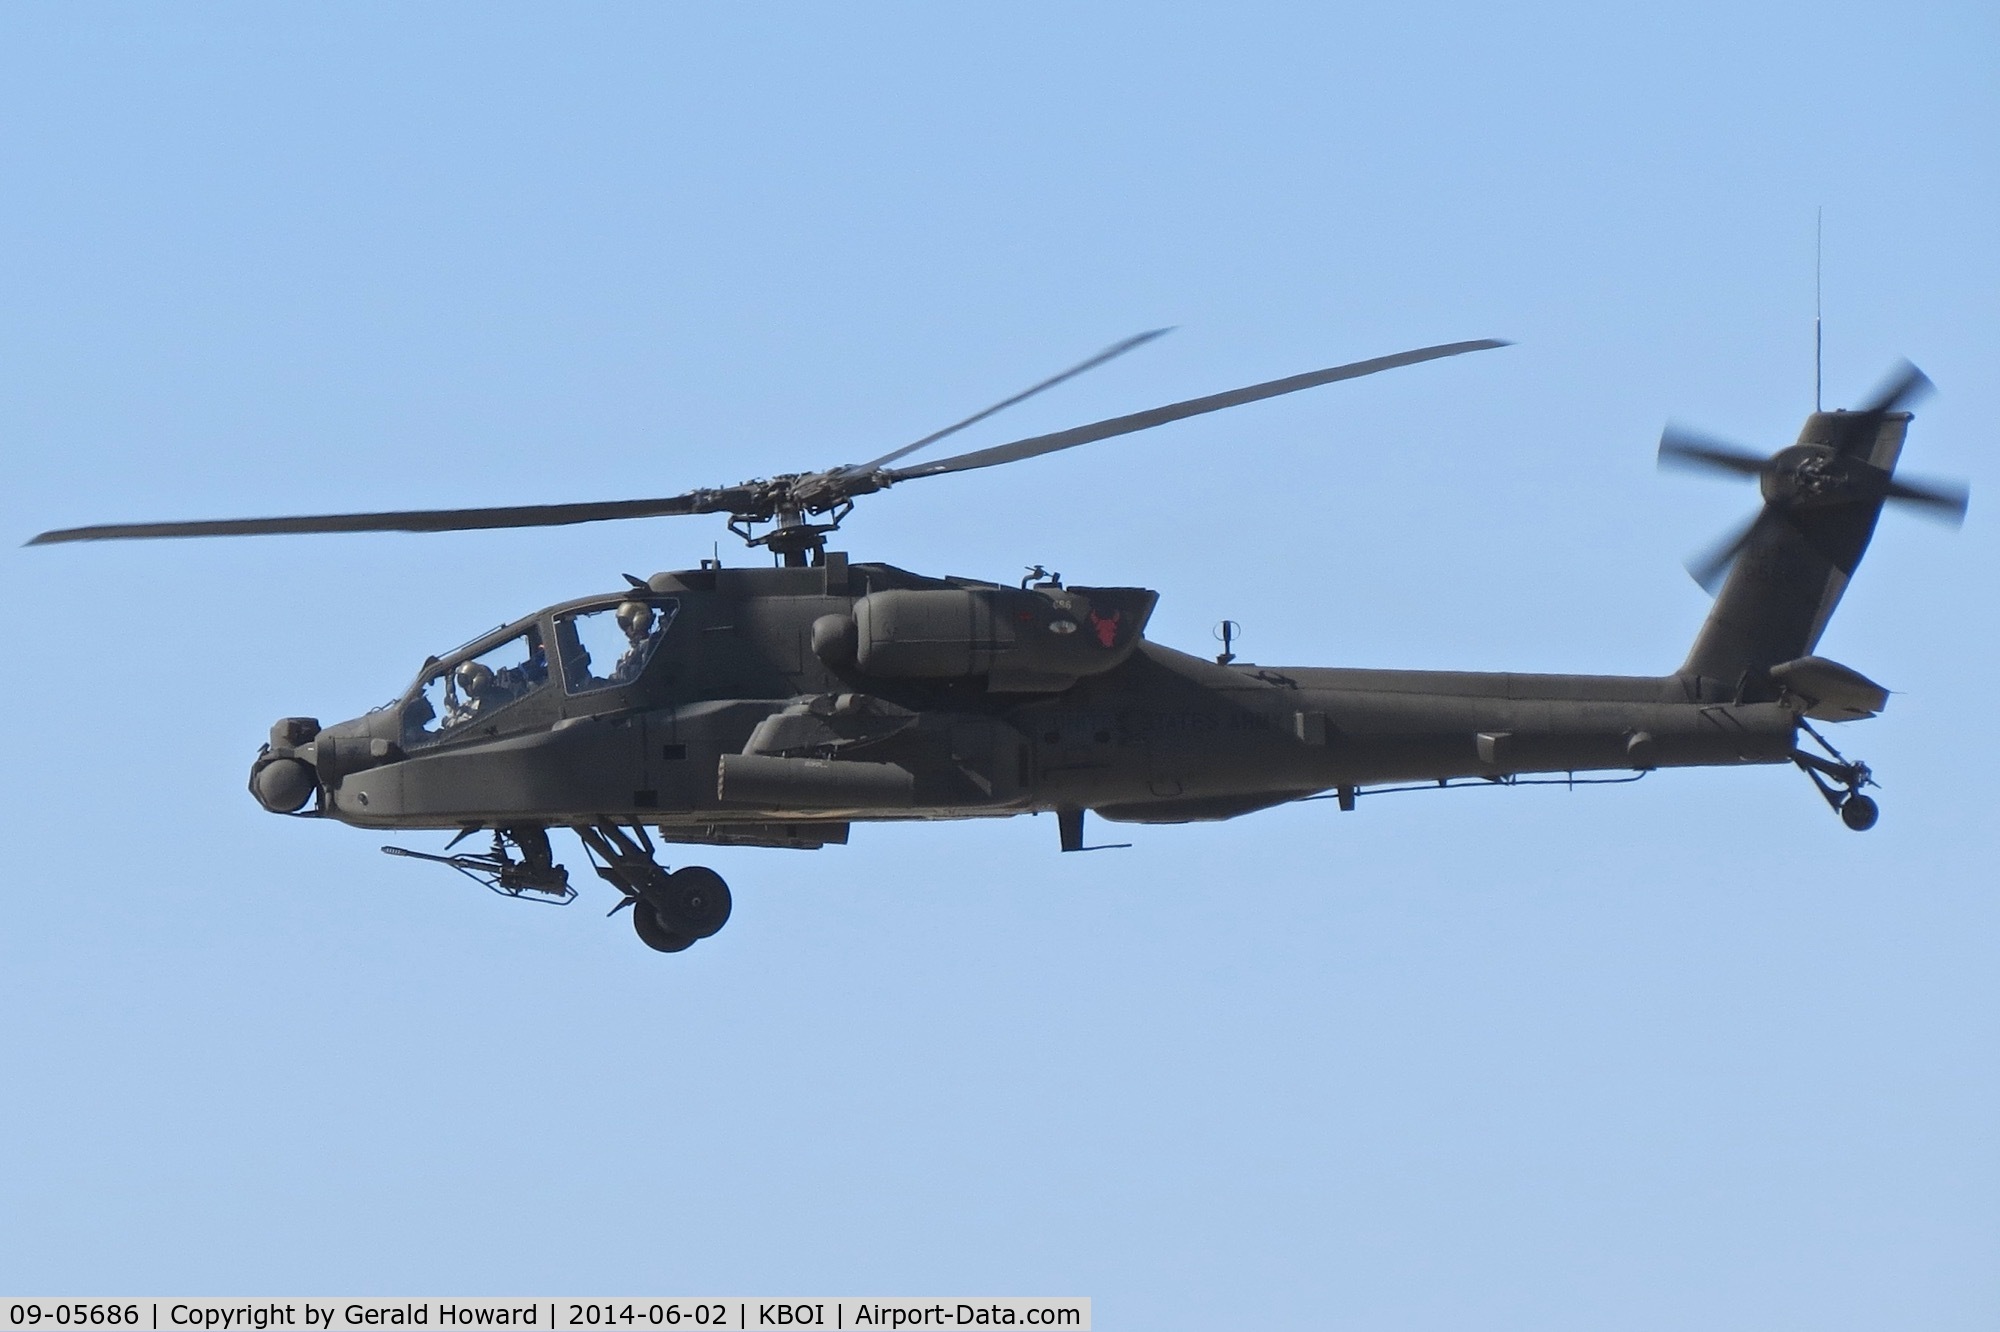 09-05686, 2009 Boeing AH-64D Longbow Apache C/N PVD686, Departing BOI. 1-183rd AVN BN, Idaho Army National Guard. The AH-64s were transferred back to the active U.S. Army in 2016.